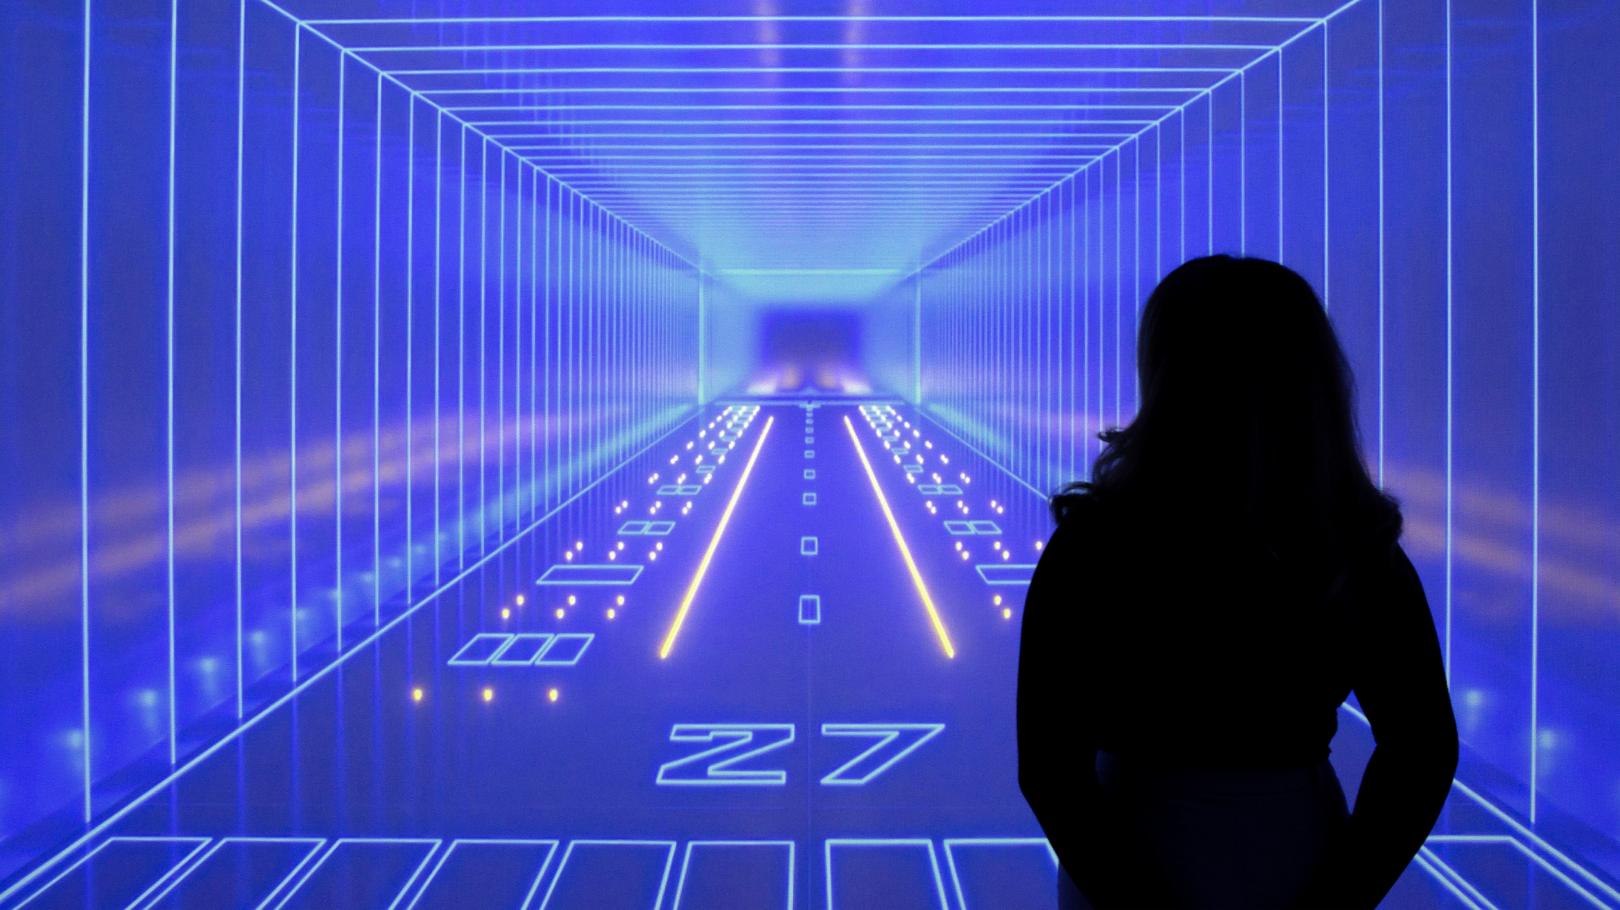 the silohuette of a woman in front of a bright blue image depicting a fantastical neon runway inside an endless tunnel